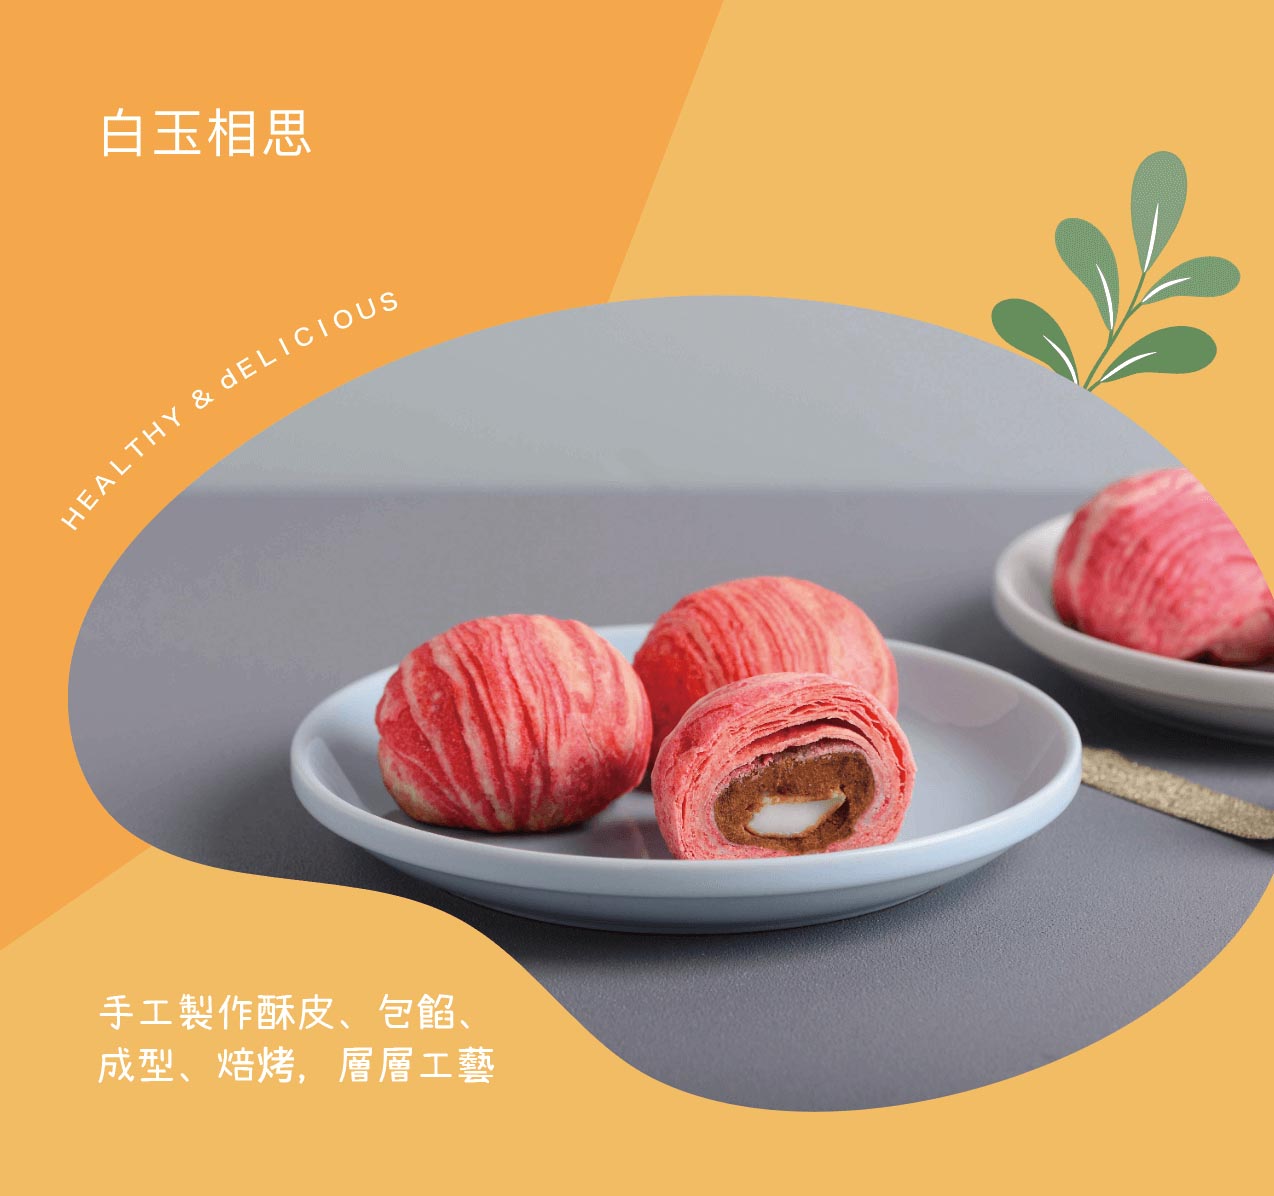 Wholesome - Red Bean & Mochi Pastry 【8 pcs】